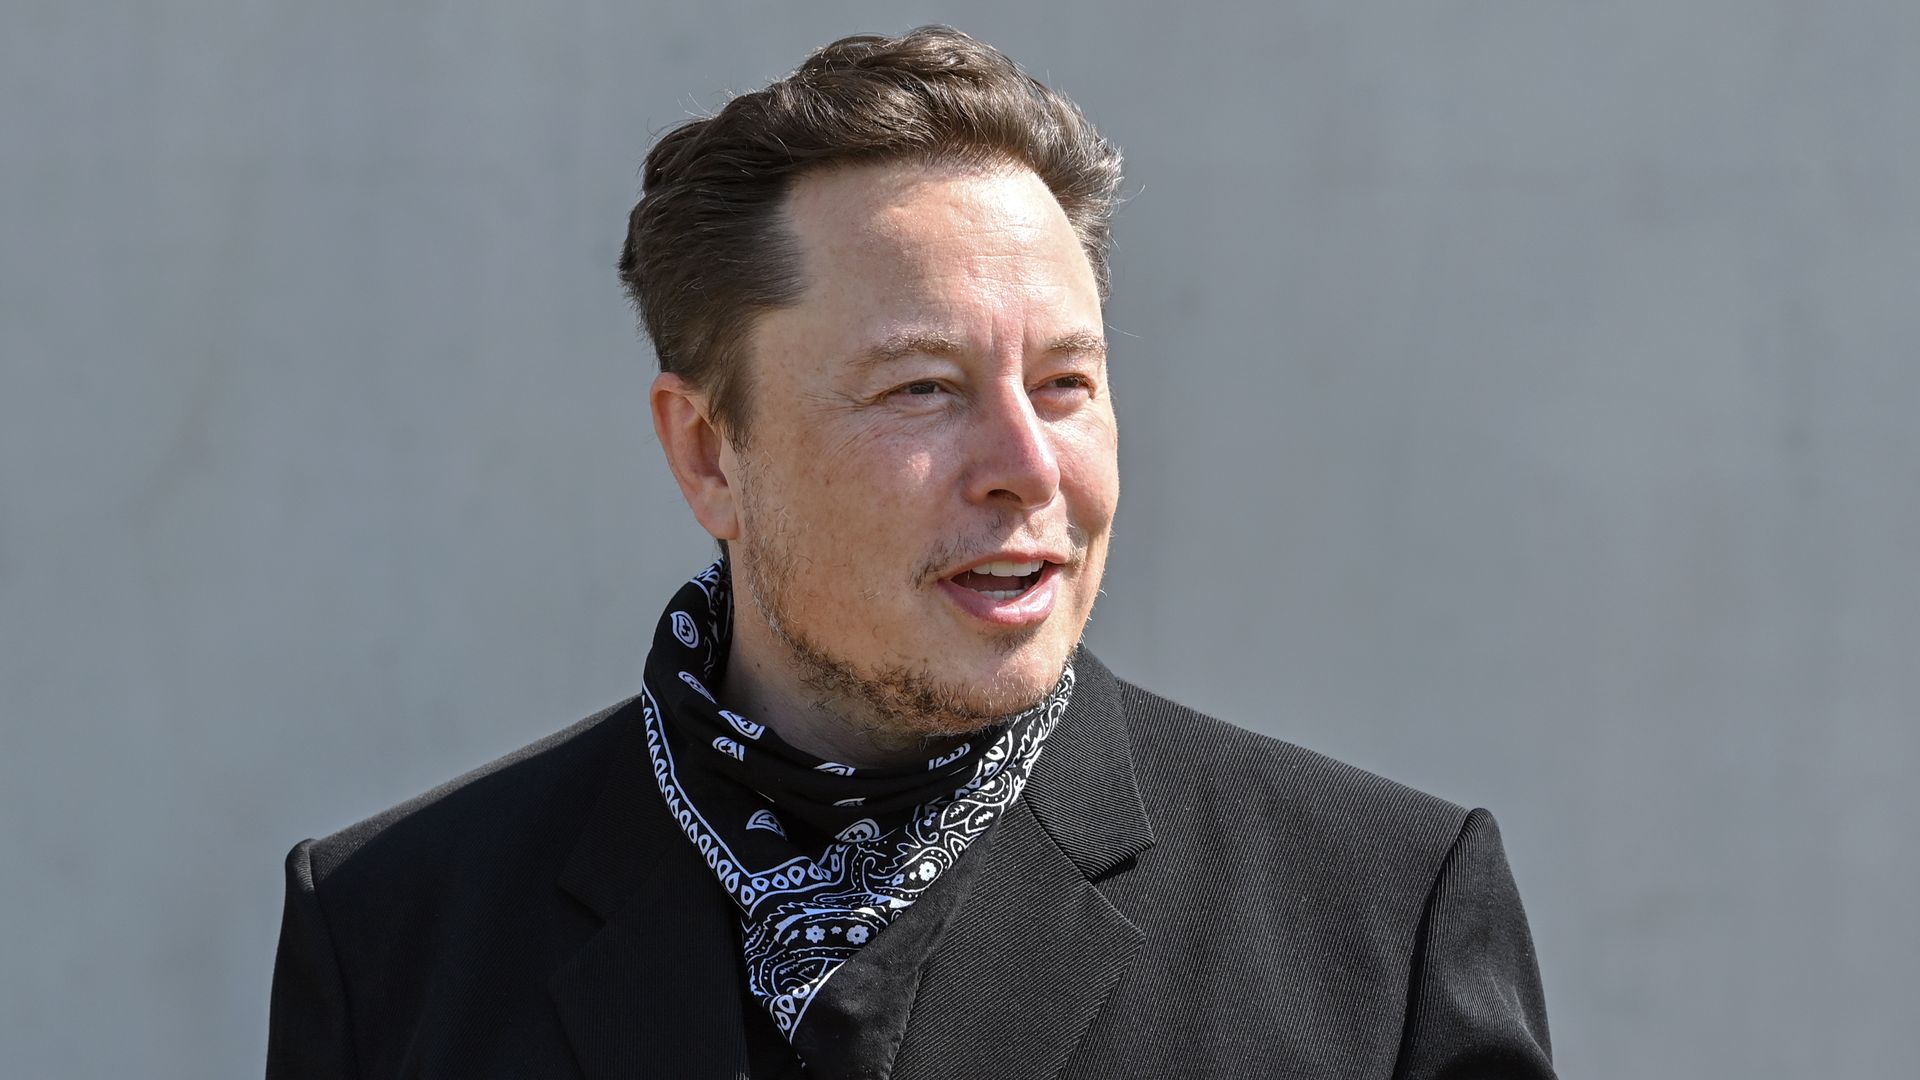 Elon Musk, Tesla CEO, stands at a press event on the grounds of the Tesla Gigafactory in Brandenburg, Grünheide, Germany, in 2021.